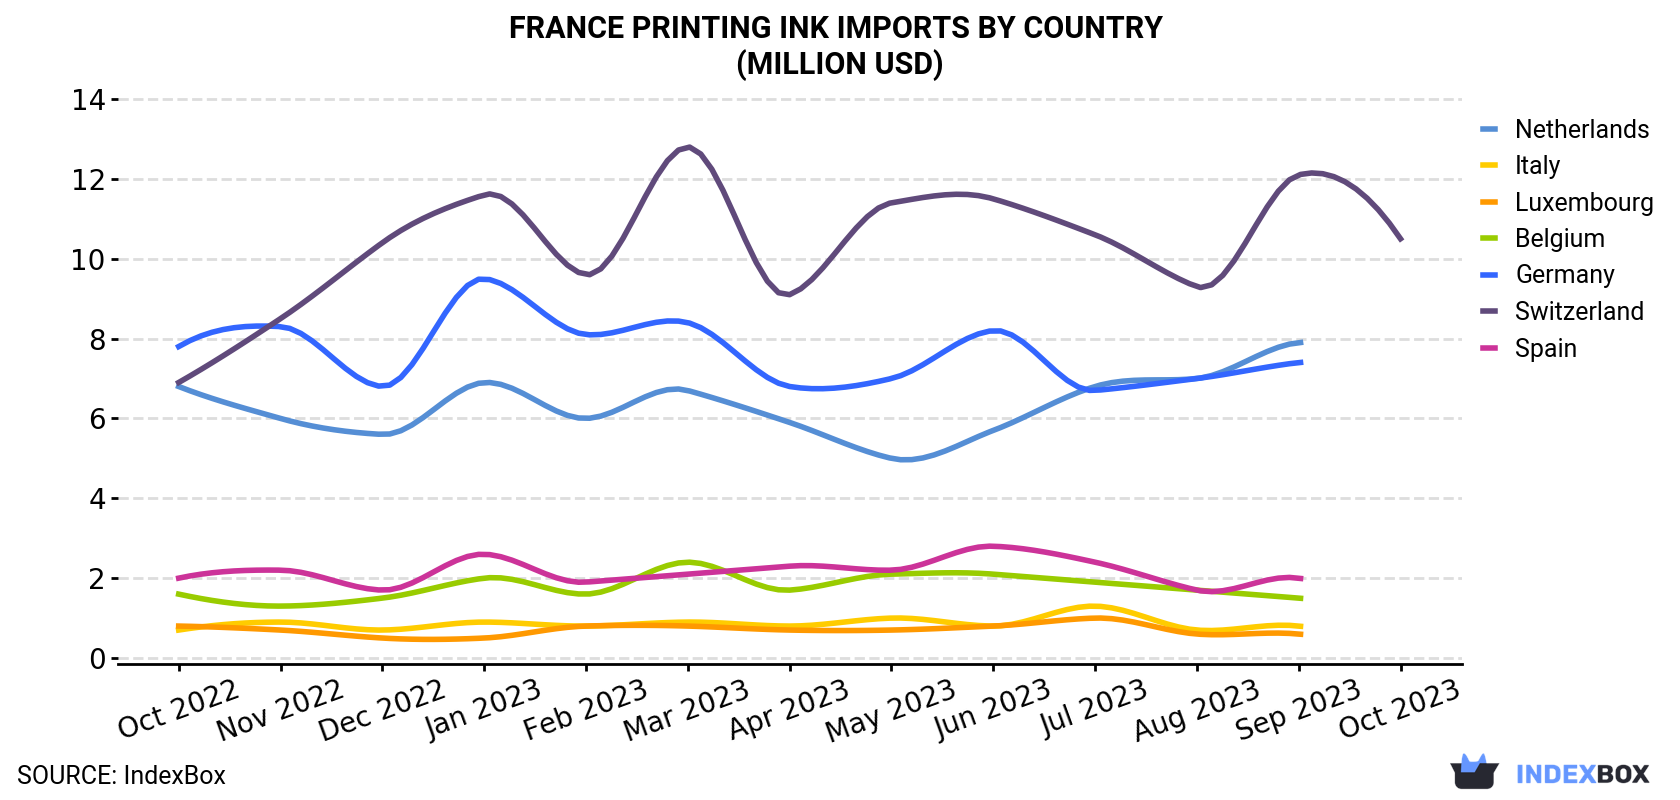 France Printing Ink Imports By Country (Million USD)